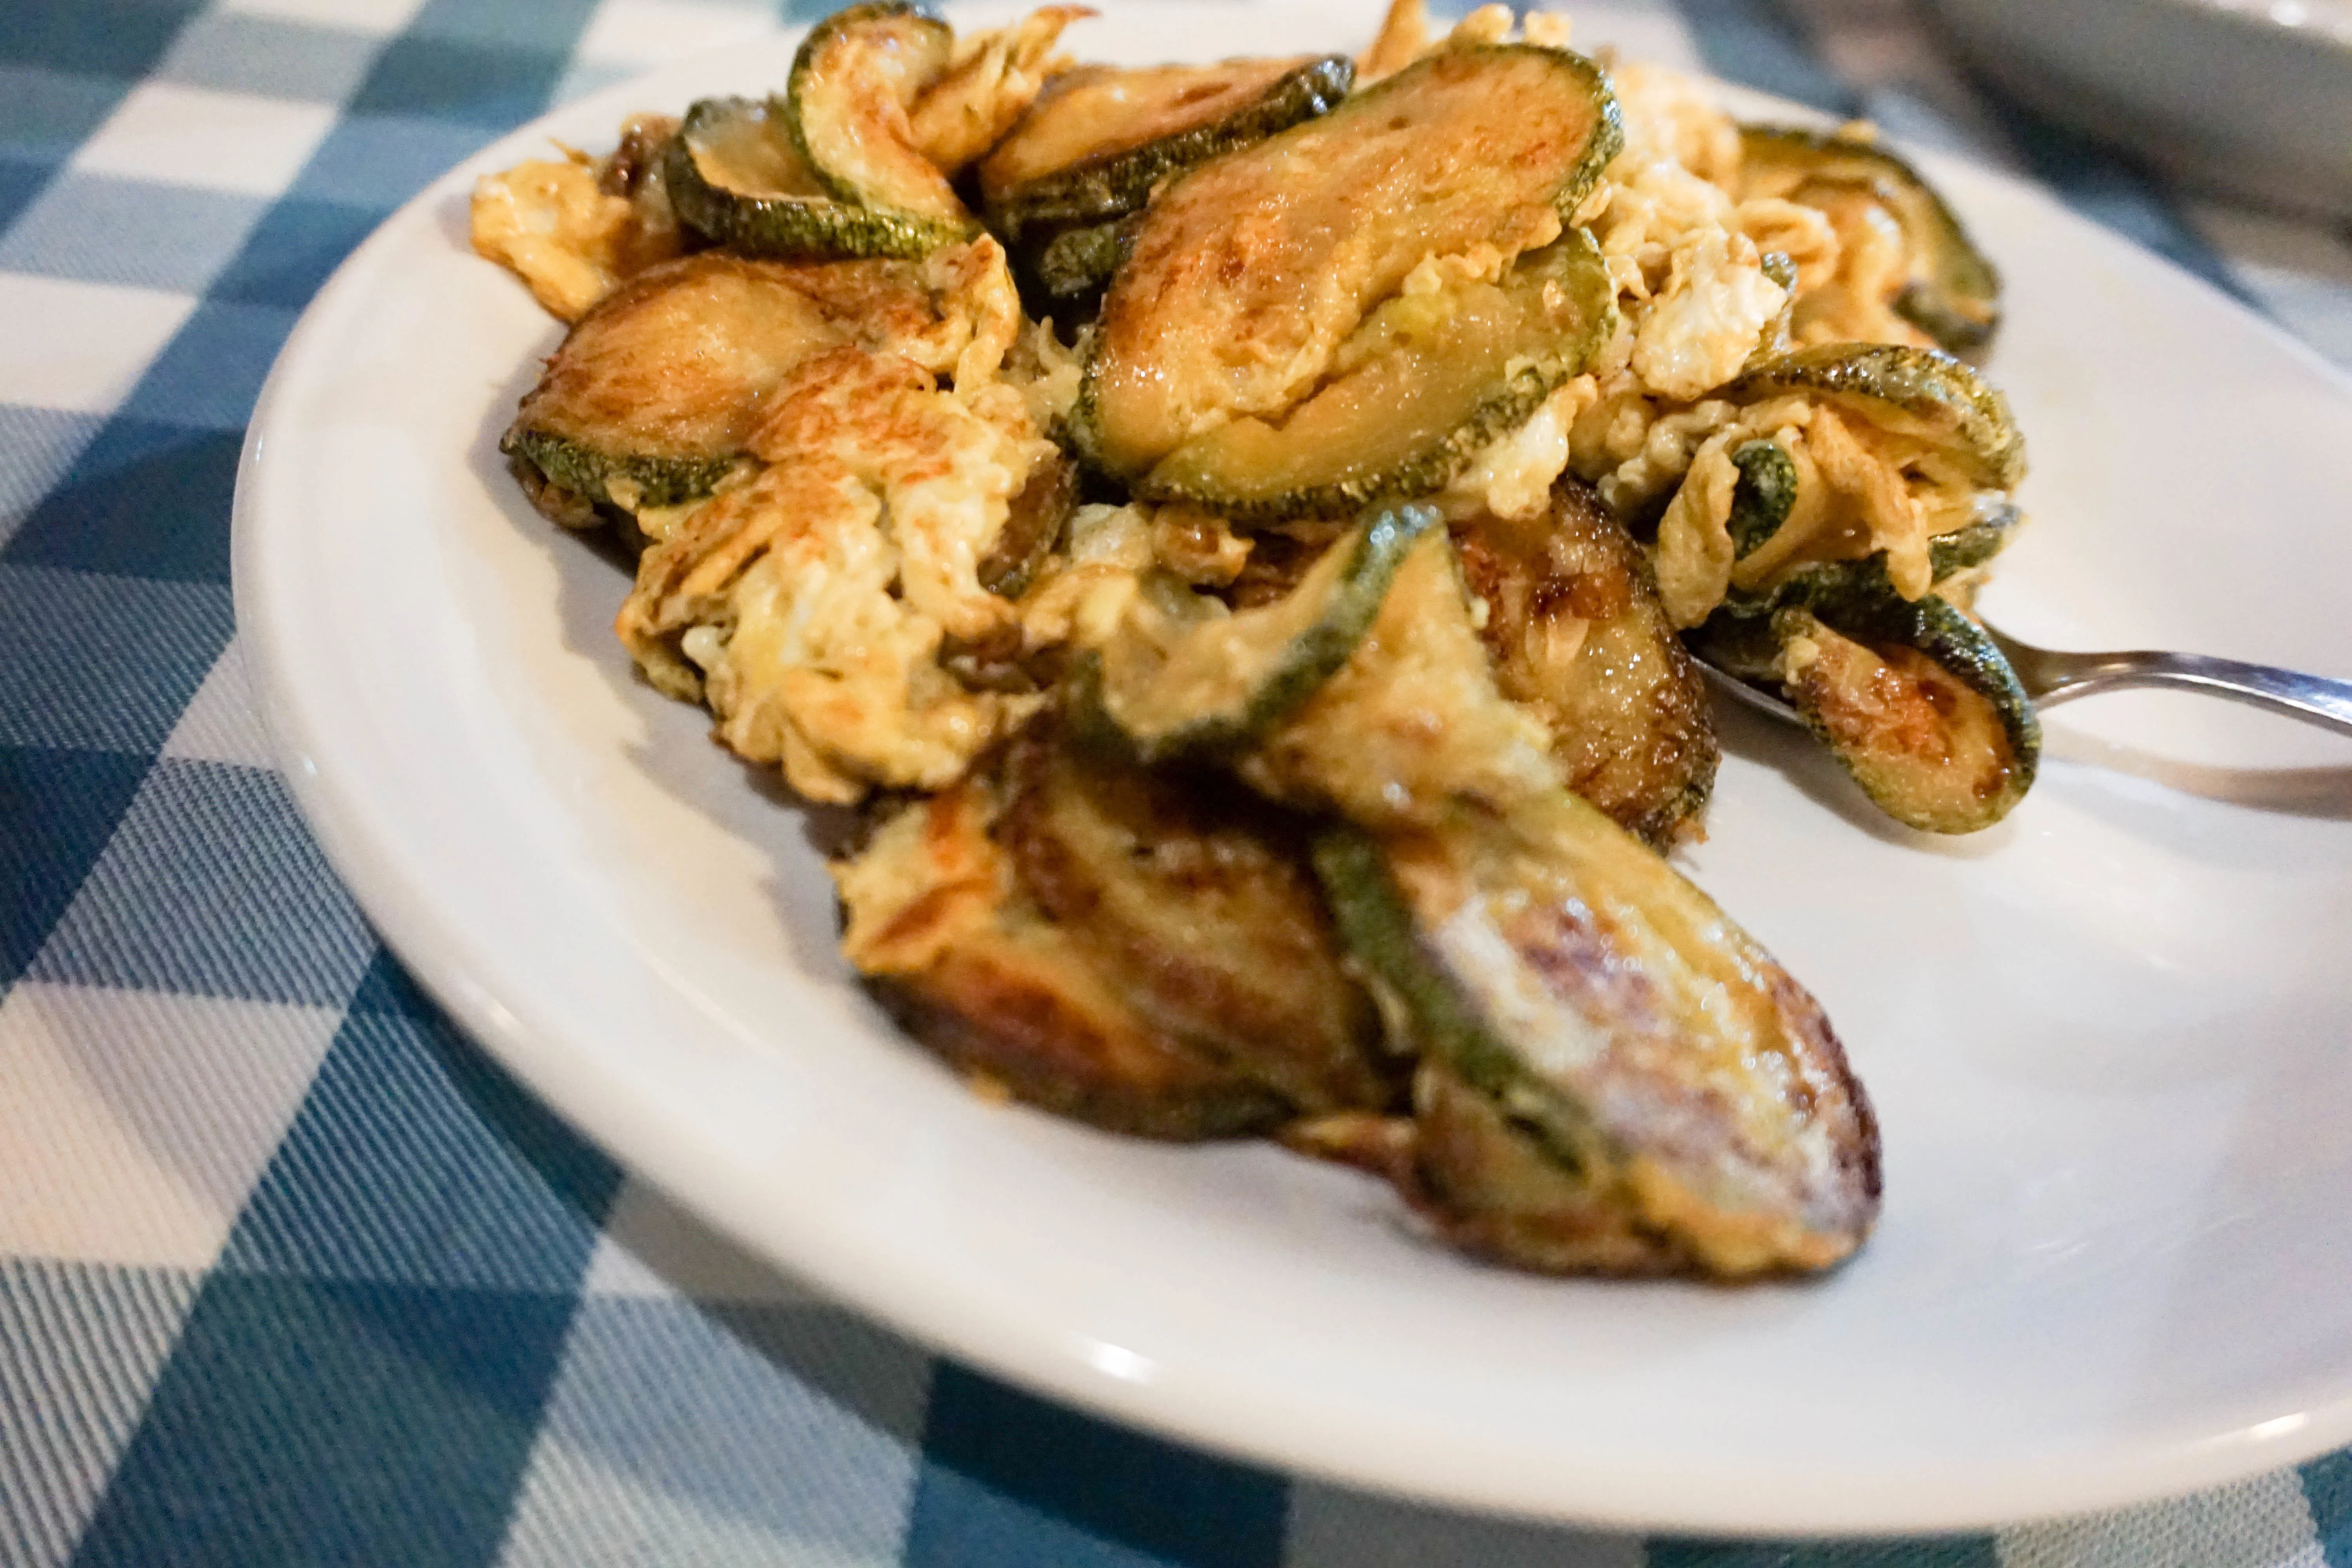 Courgettes with eggs is a typical food in Cyprus